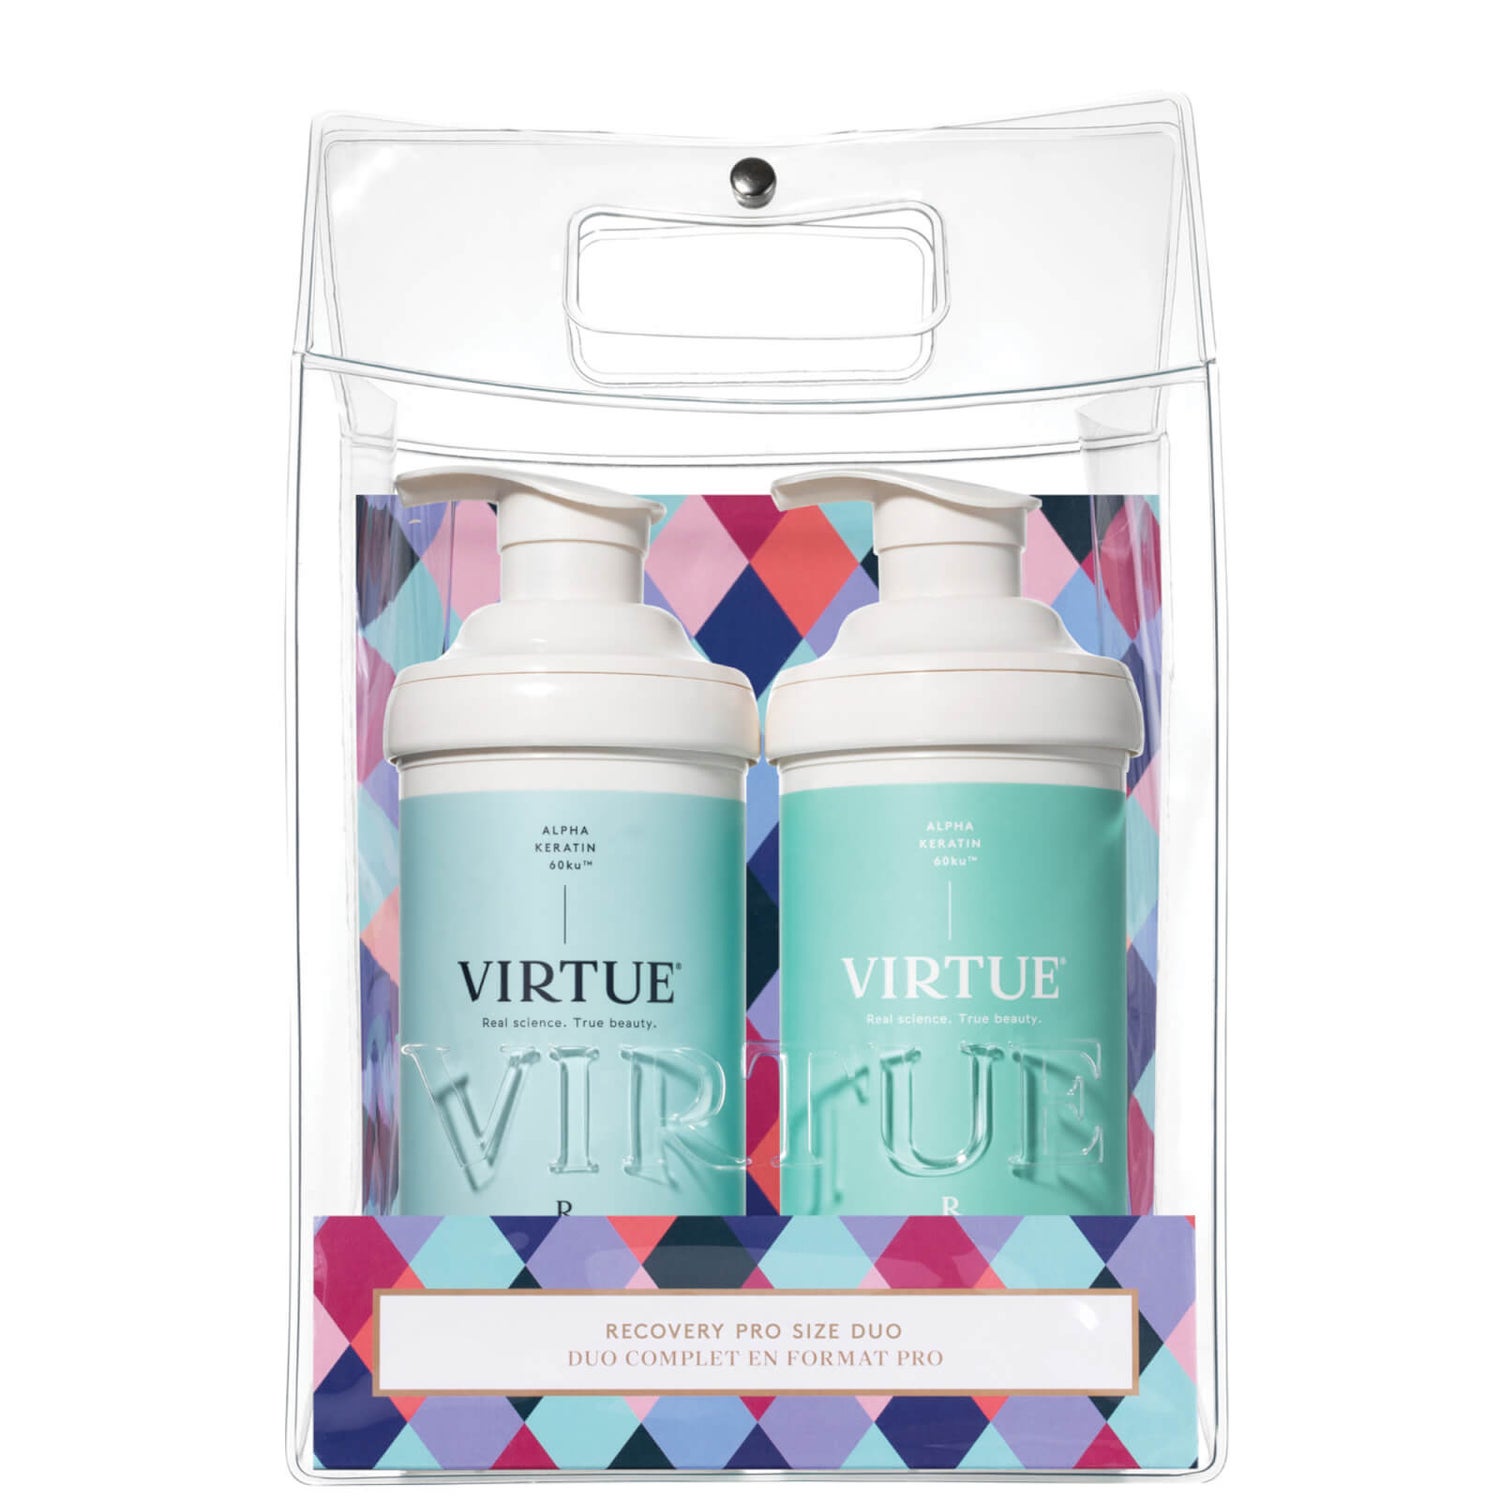 VIRTUE Celebrate Hair Repair Recovery Pro Size Duo (Worth £160.00)